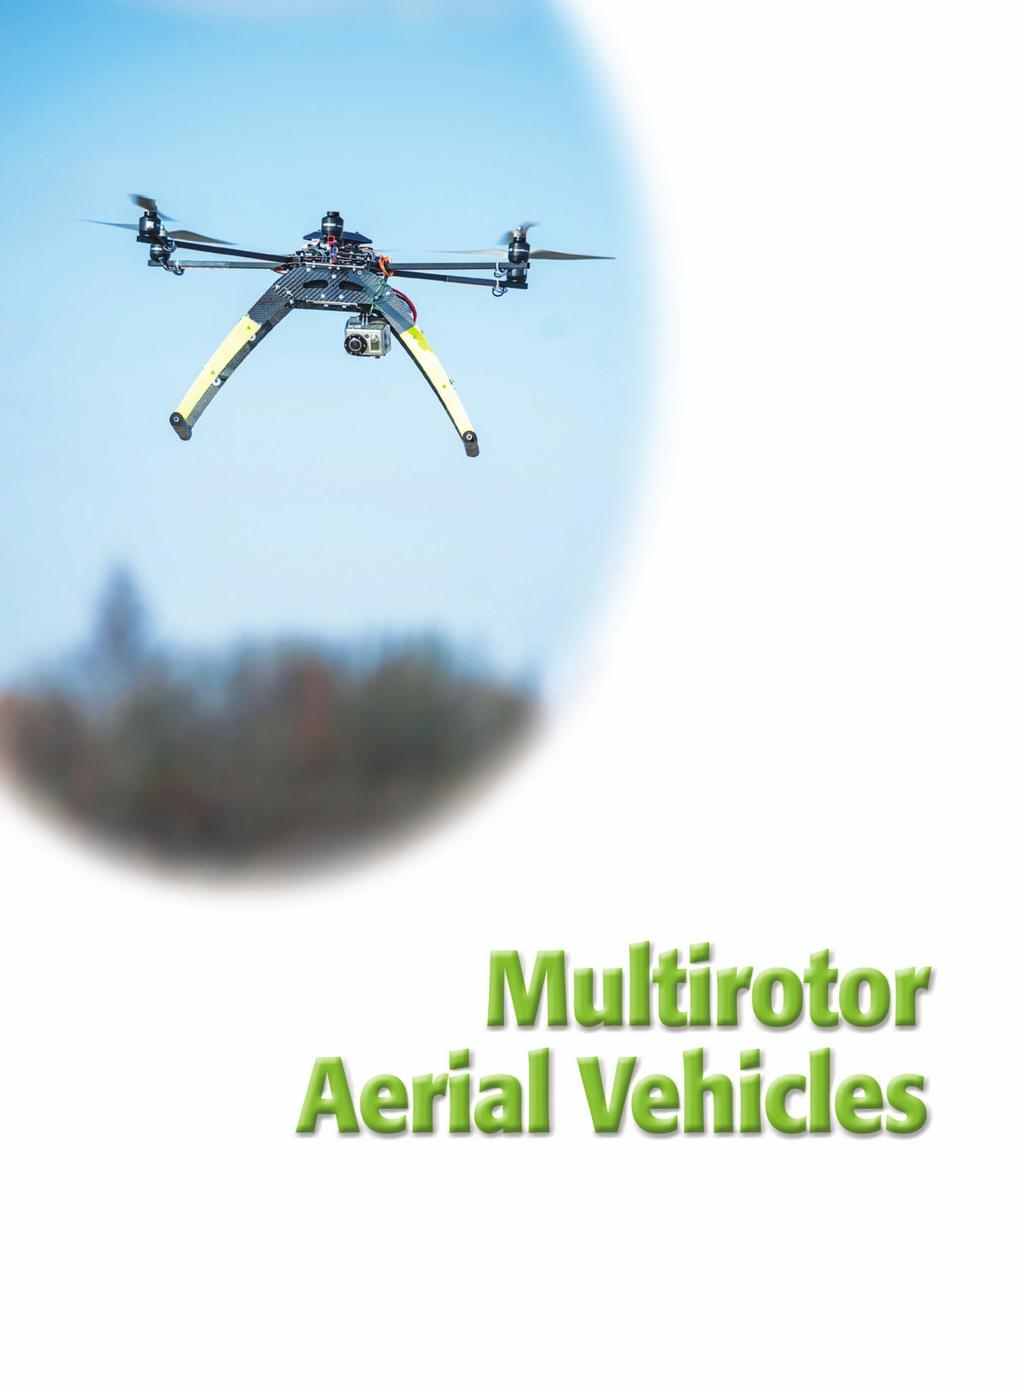 This article provides a tutorial introduction to modeling, estimation, and control for multirotor aerial vehicles that includes the common four-rotor or quadrotor case.